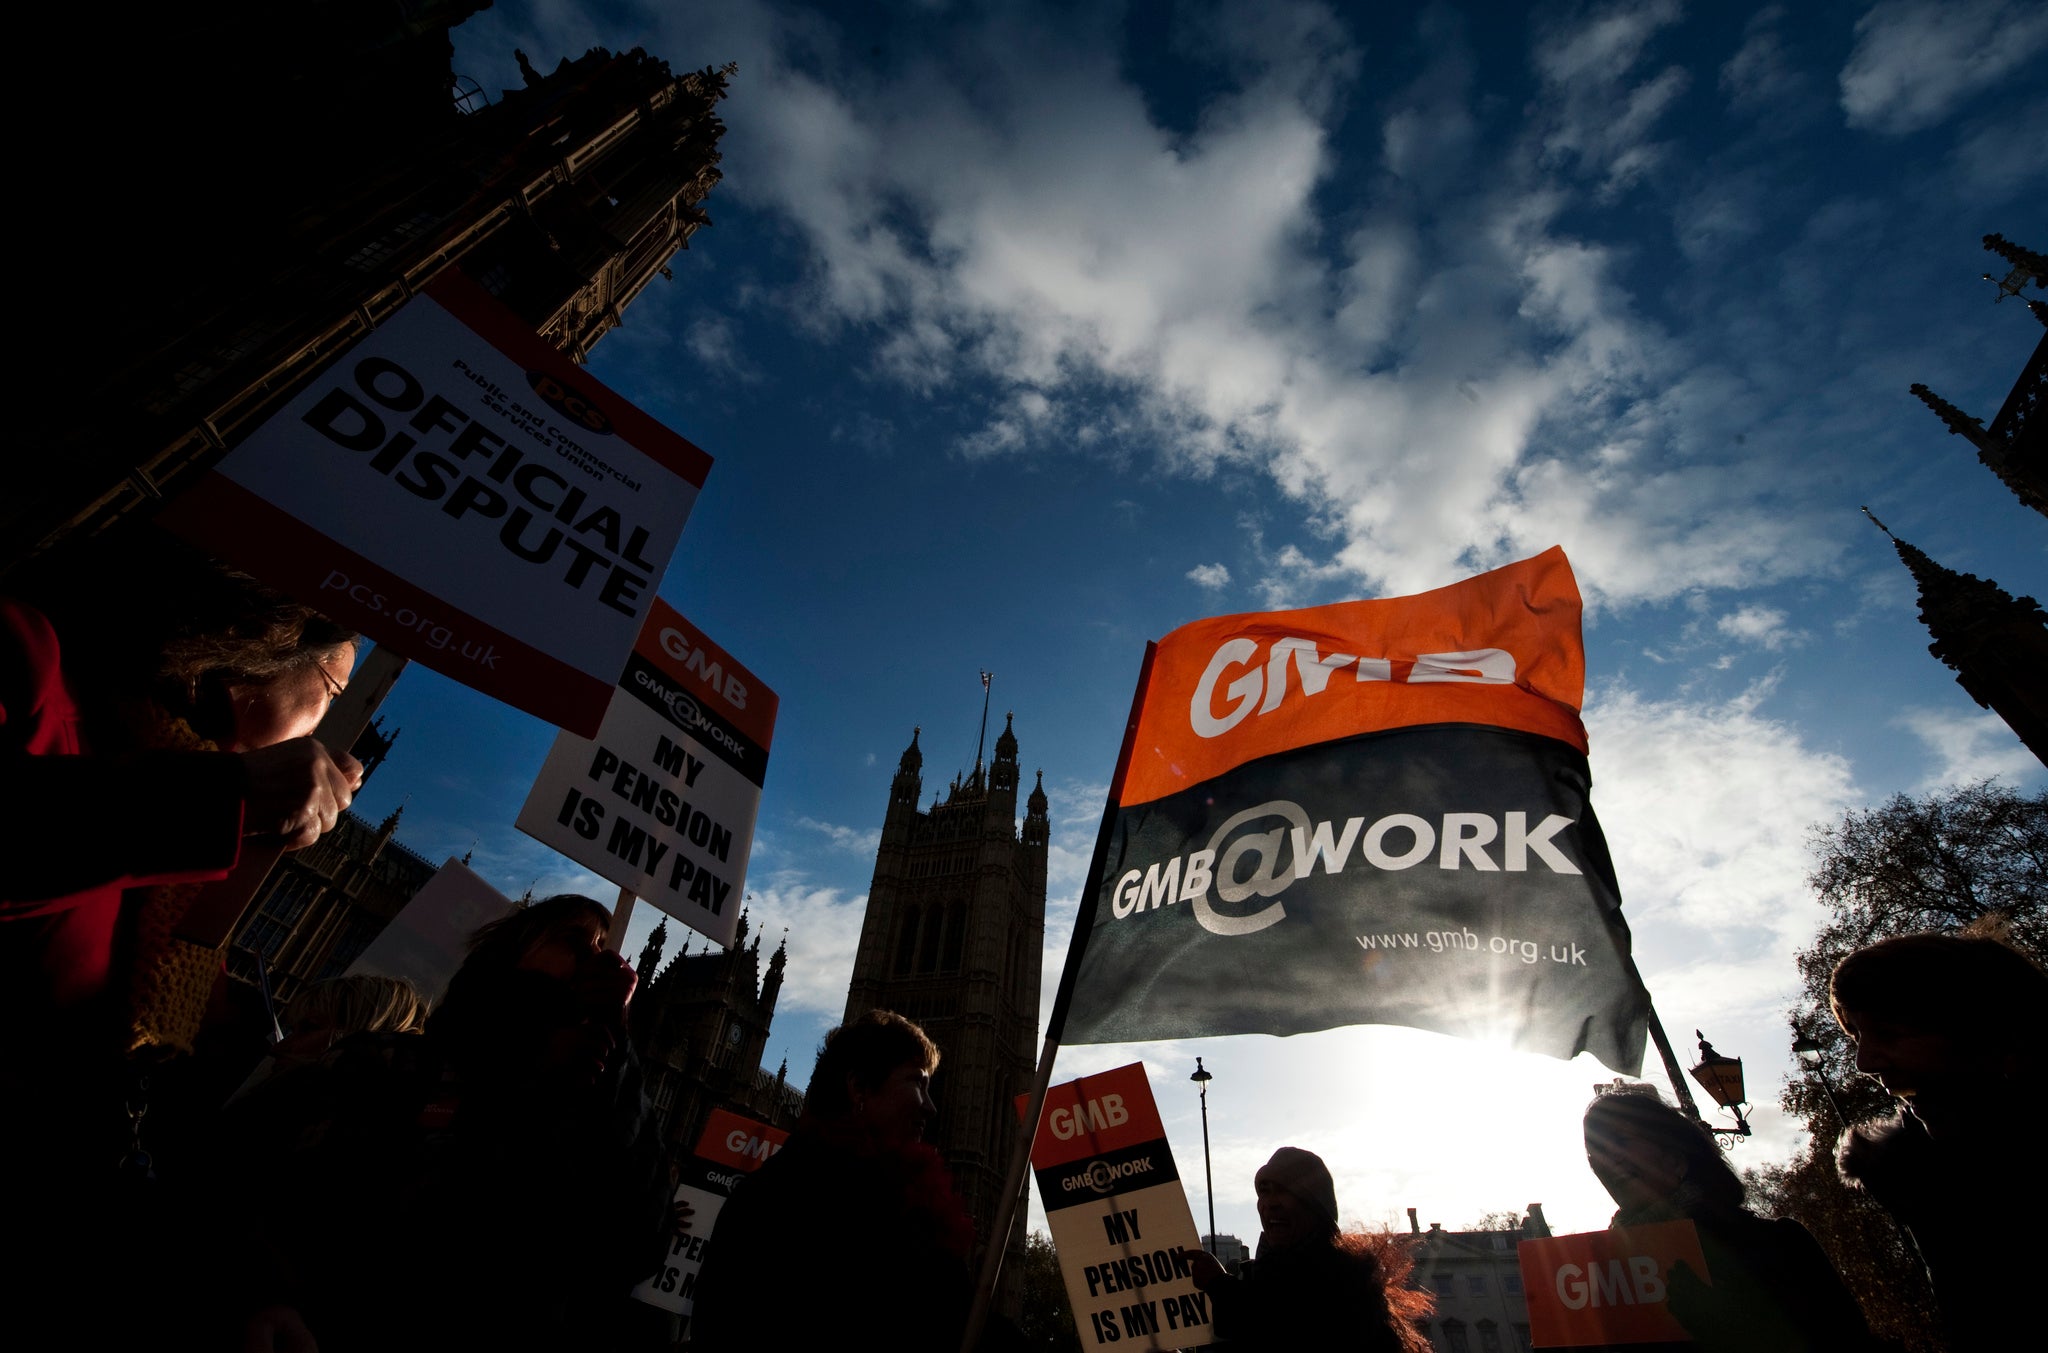 A protest organised by the British Workers' union GMB outside parliament